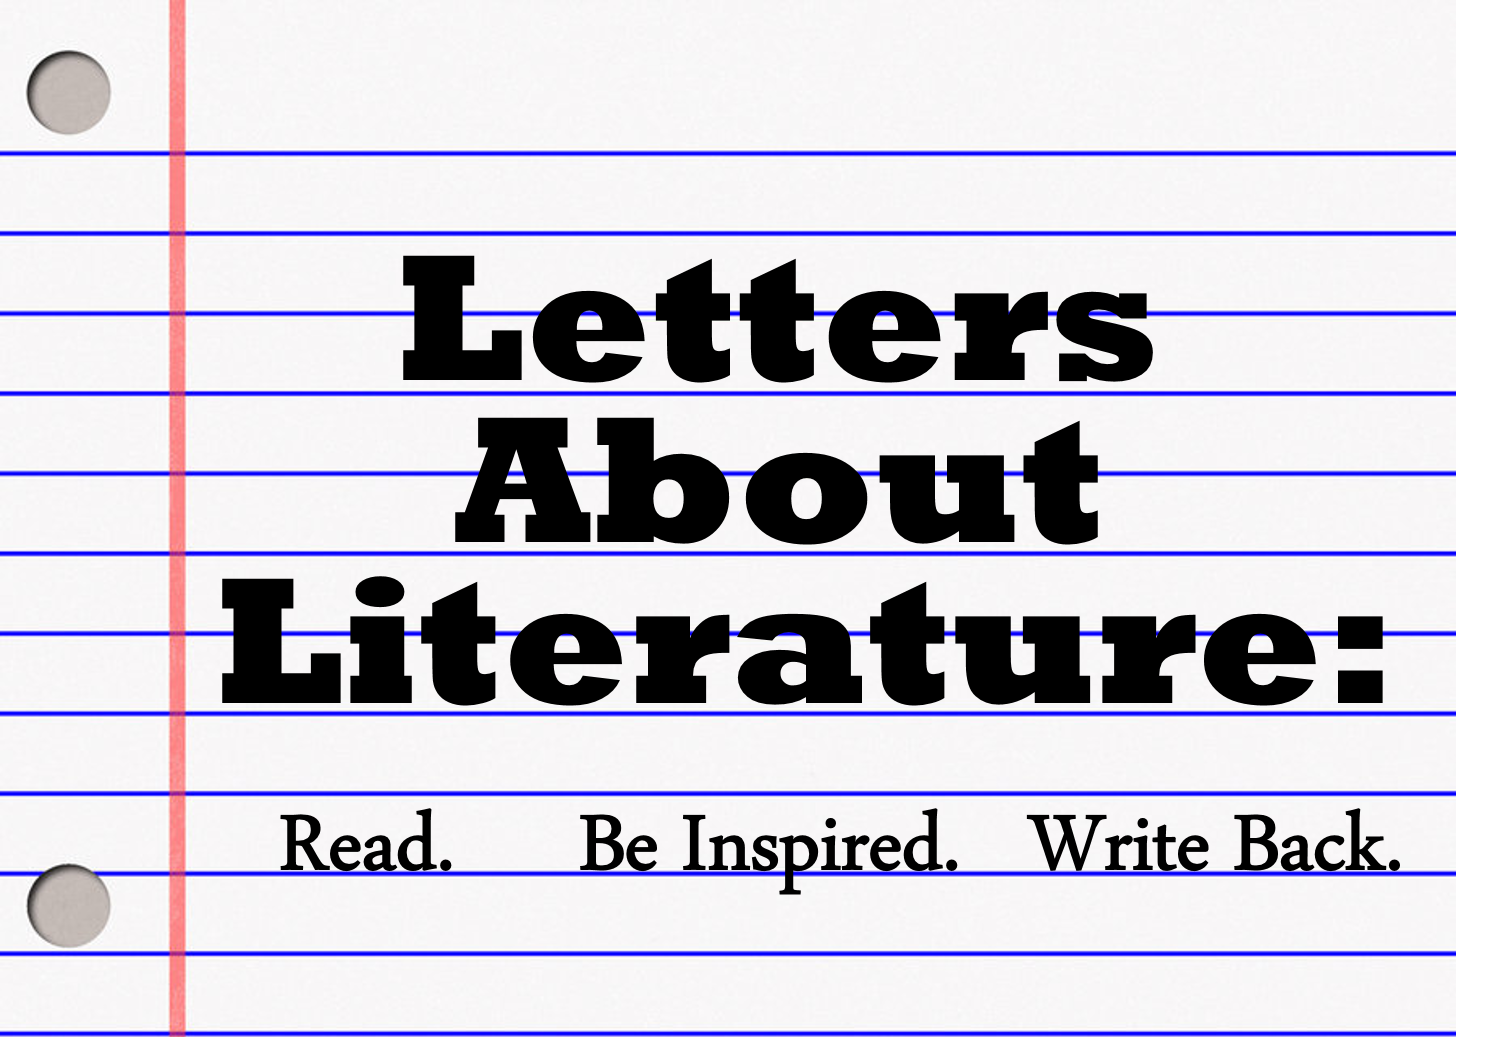 Letters About Literature: A contest and so much more